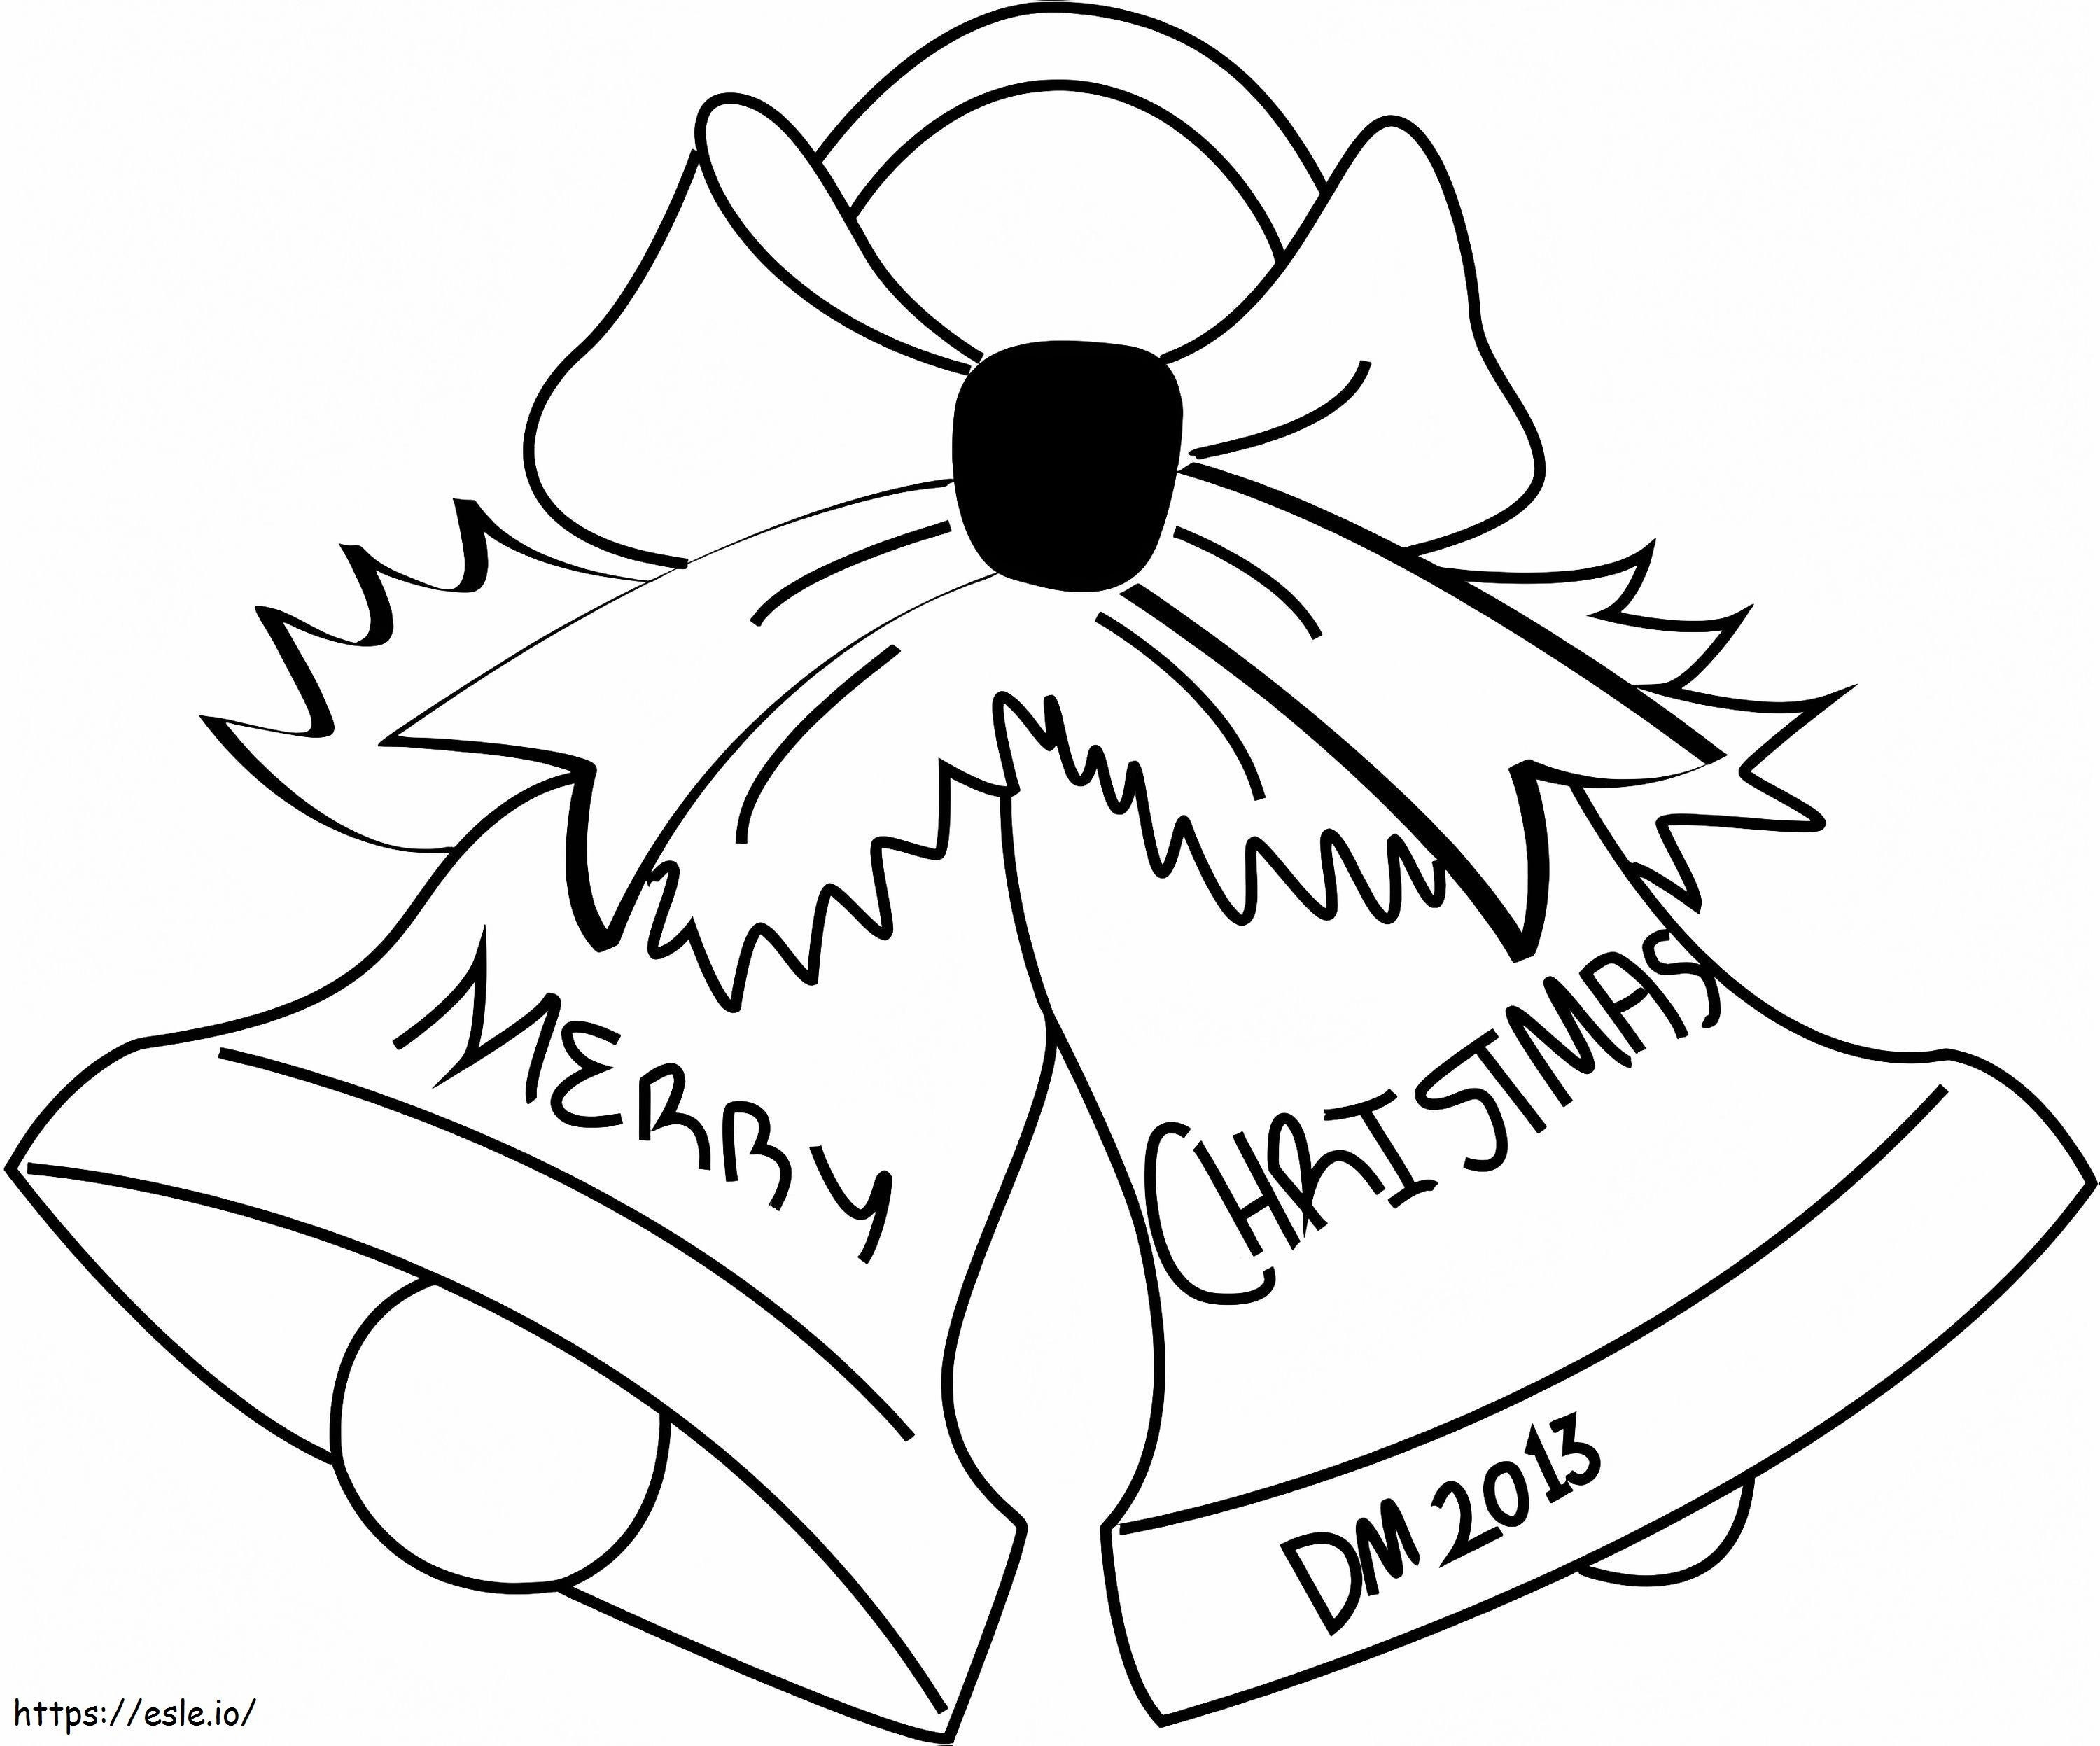 Two Merry Christmas coloring page